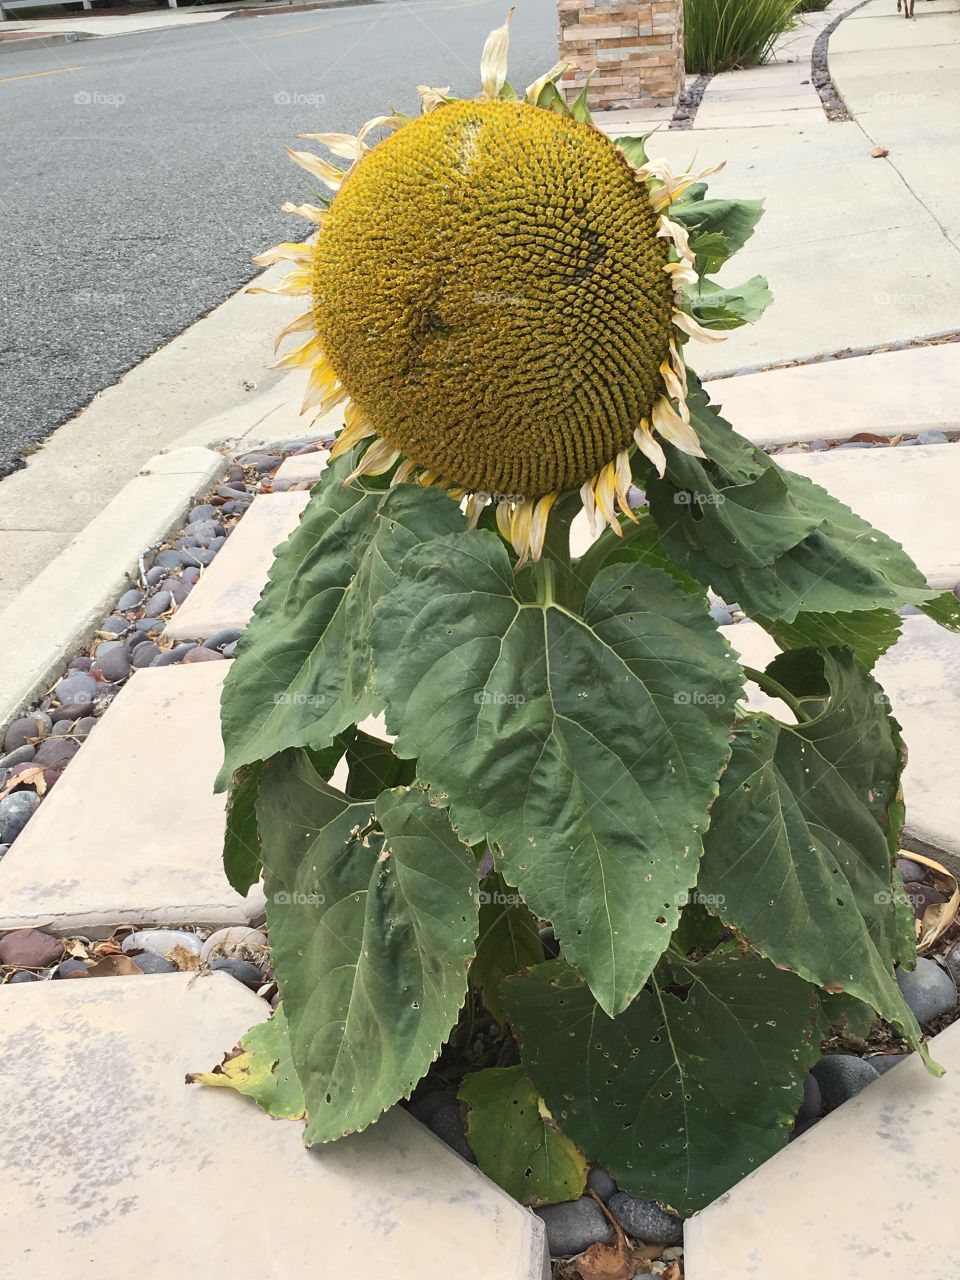 Sunflower in the city